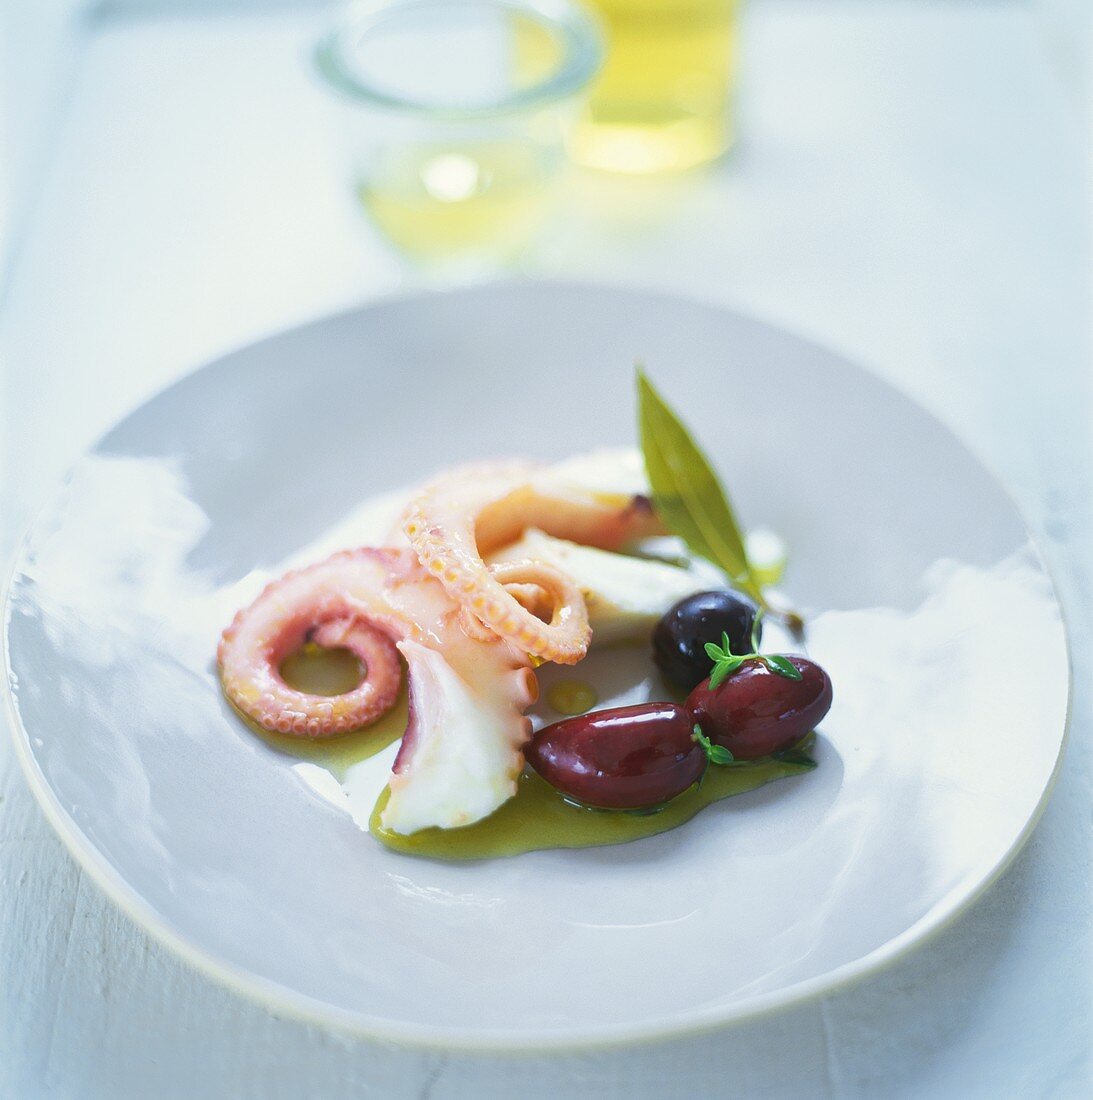 Marinated octopus arms with olives